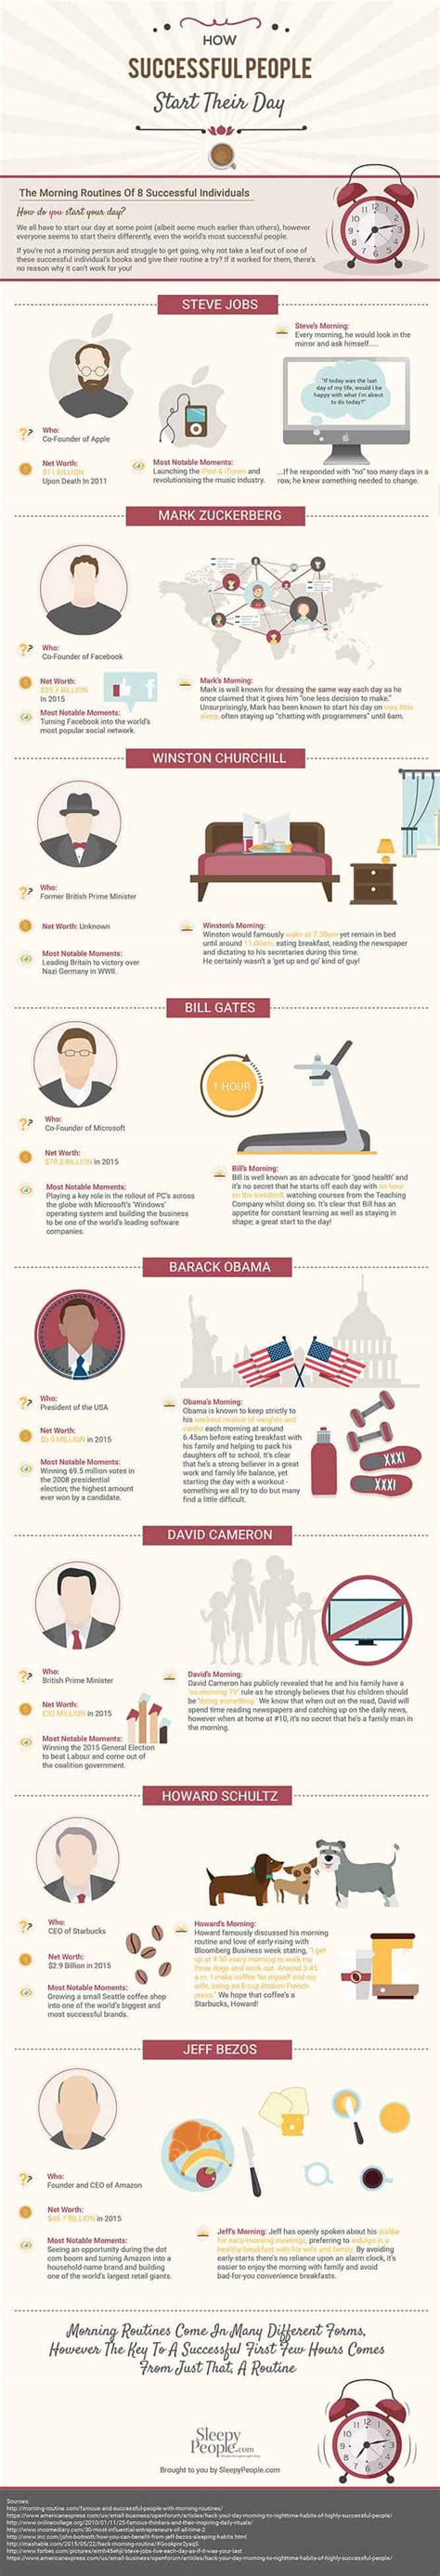 Morning Routines From Historys Most Successful People Daily Infographic